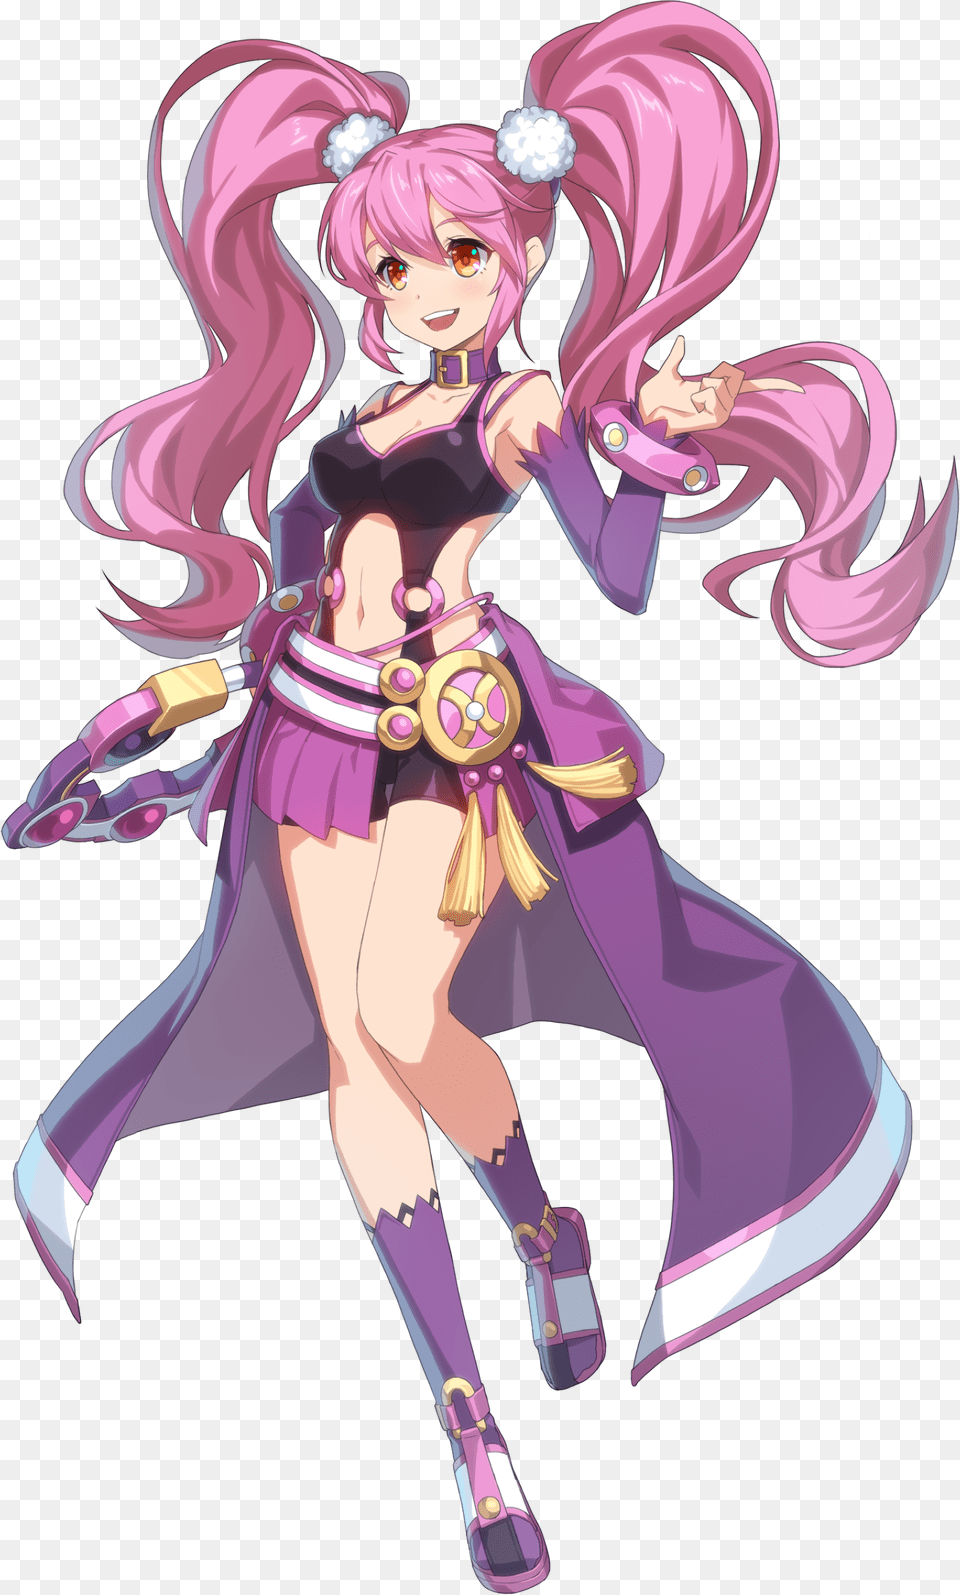 Dimensional Chaser Grand Chase Lass Grand Chase Dimensional Chaser Amy, Book, Comics, Publication, Manga Png Image